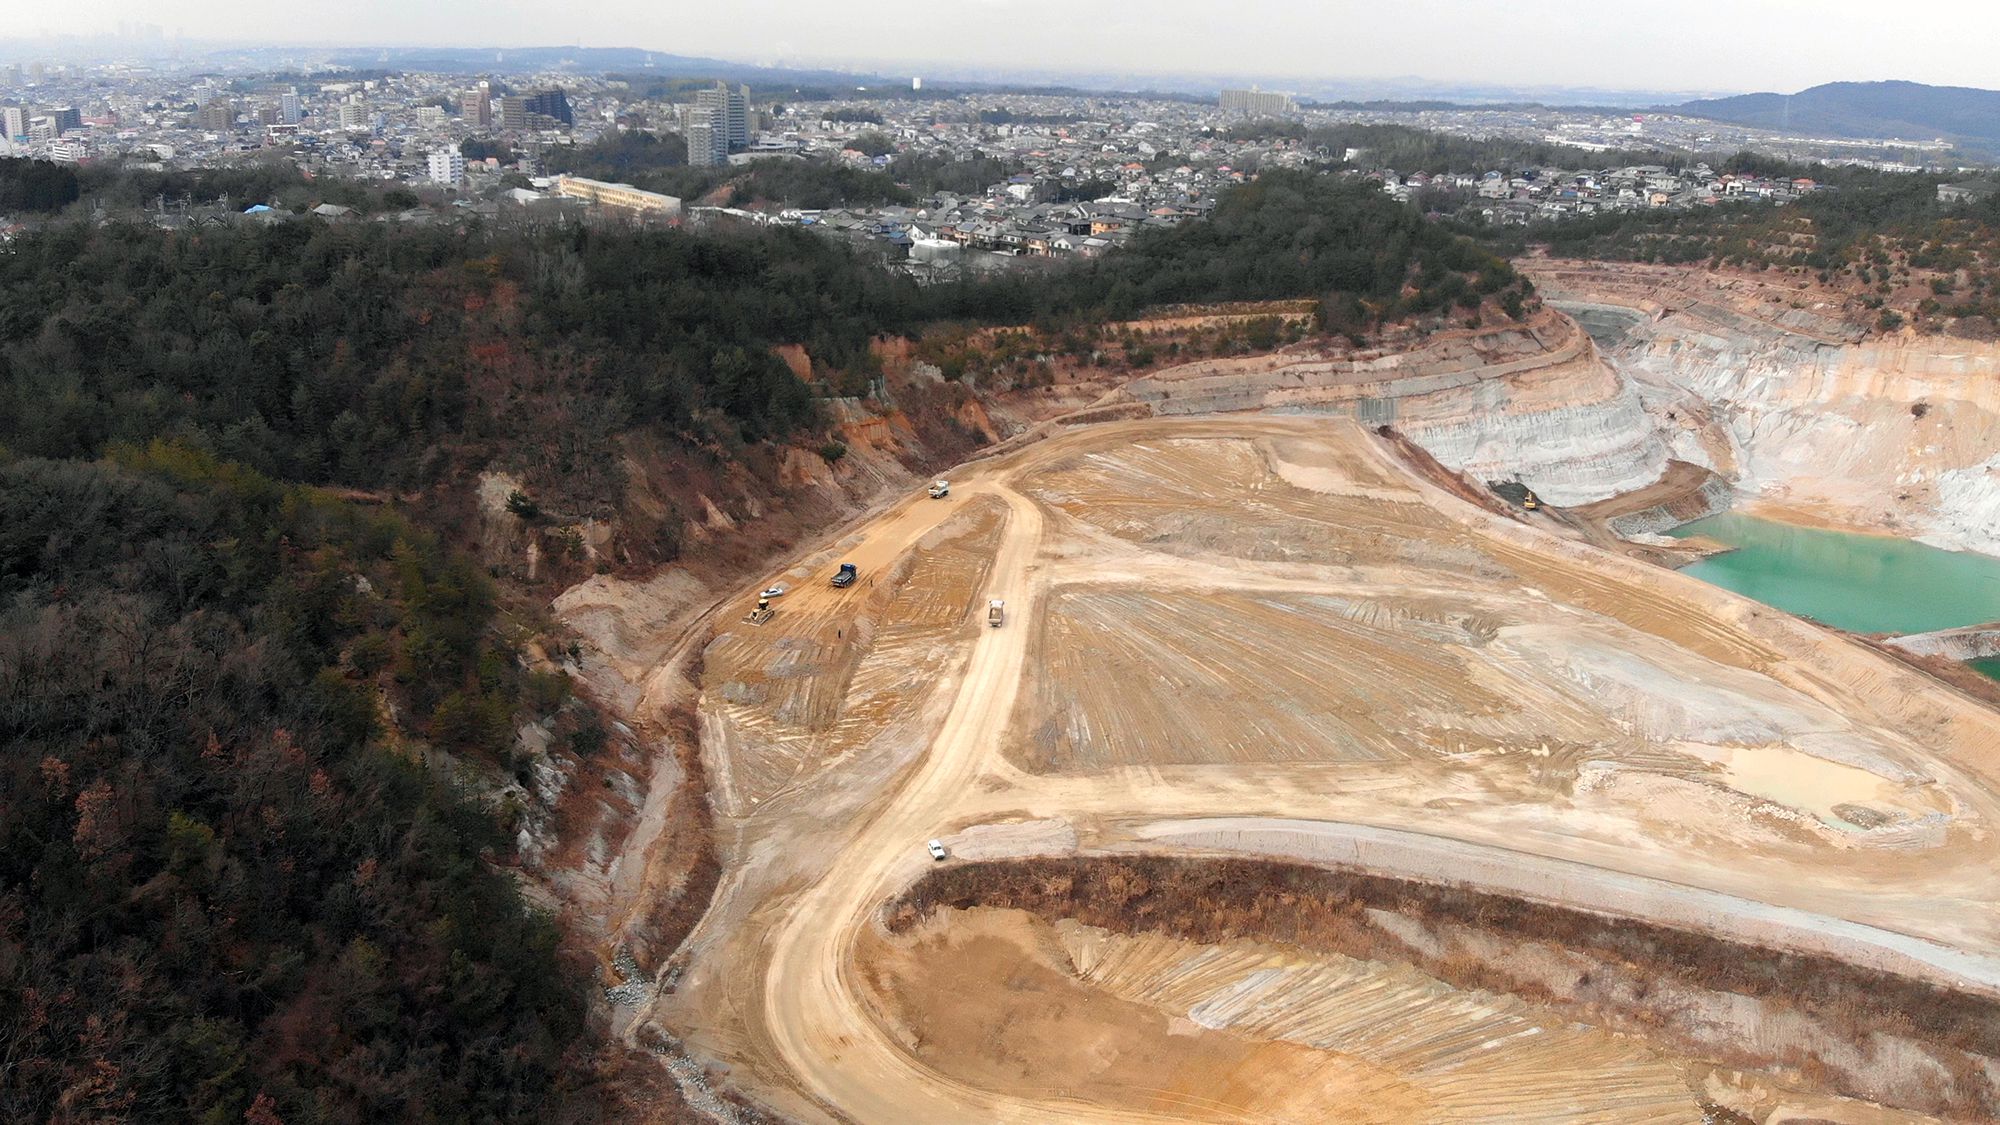 The Clay Pit in Seto. The region's clay are used at Mino and other production areas.